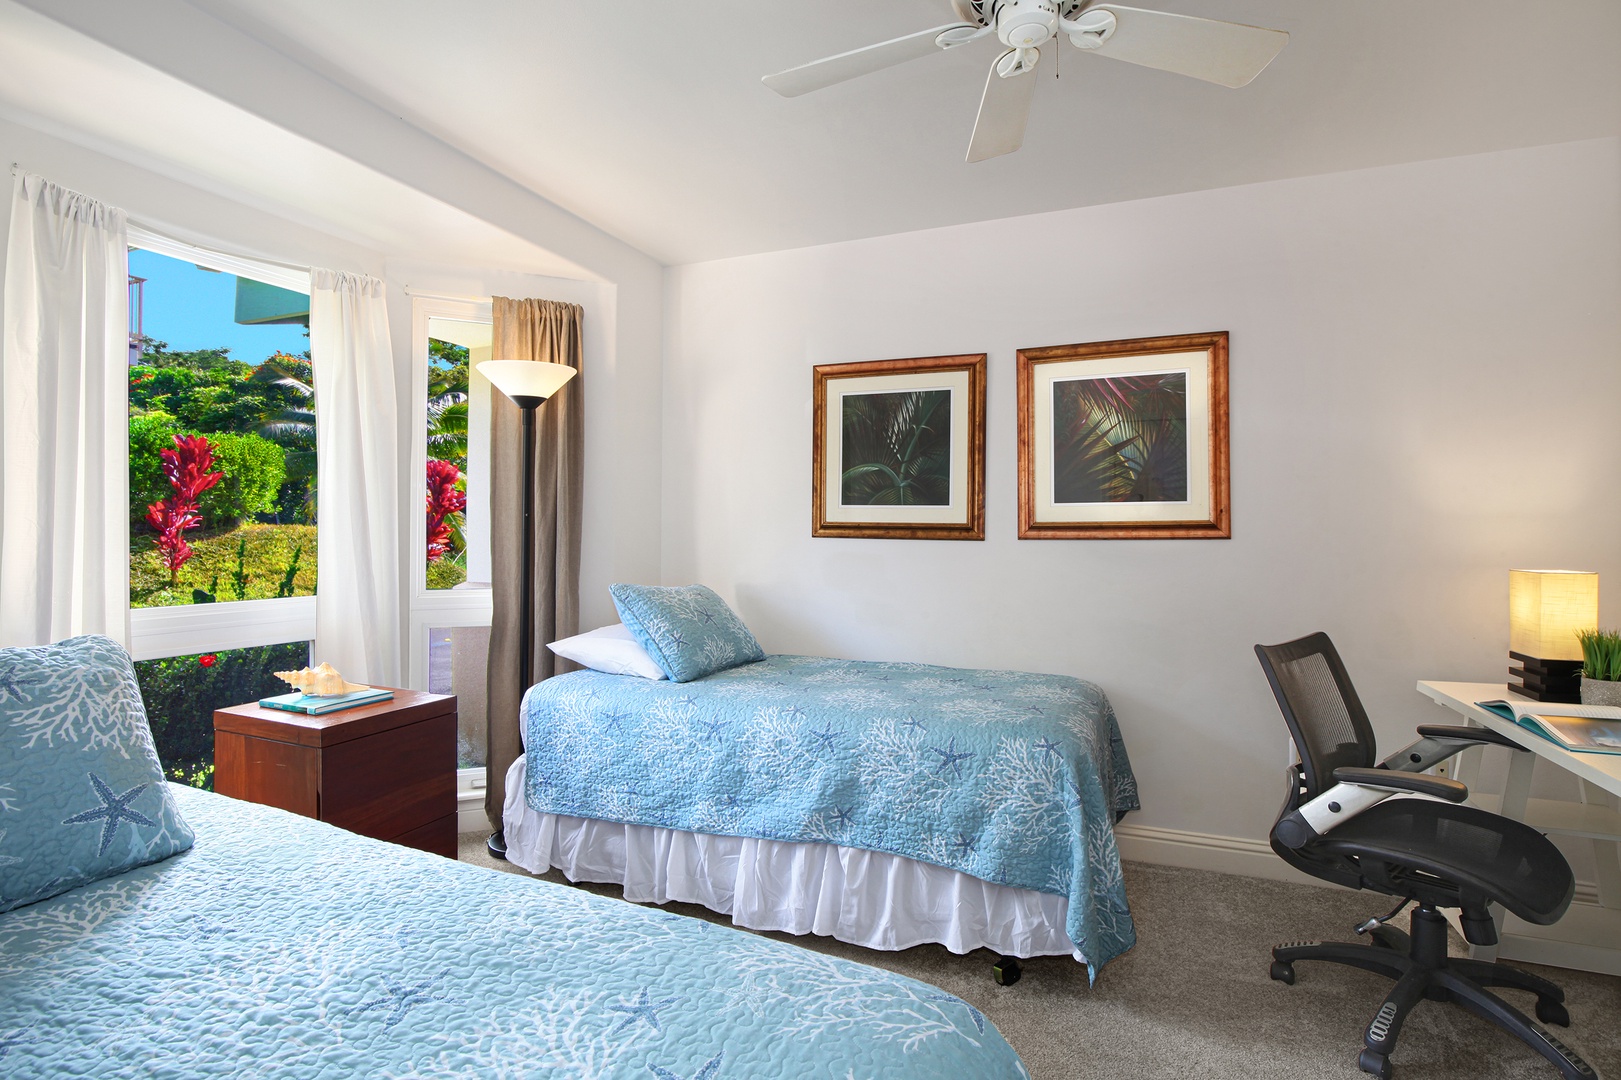 Princeville Vacation Rentals, Villas of Kamalii #35 - A third bedroom also has its own full bathroom with twin beds